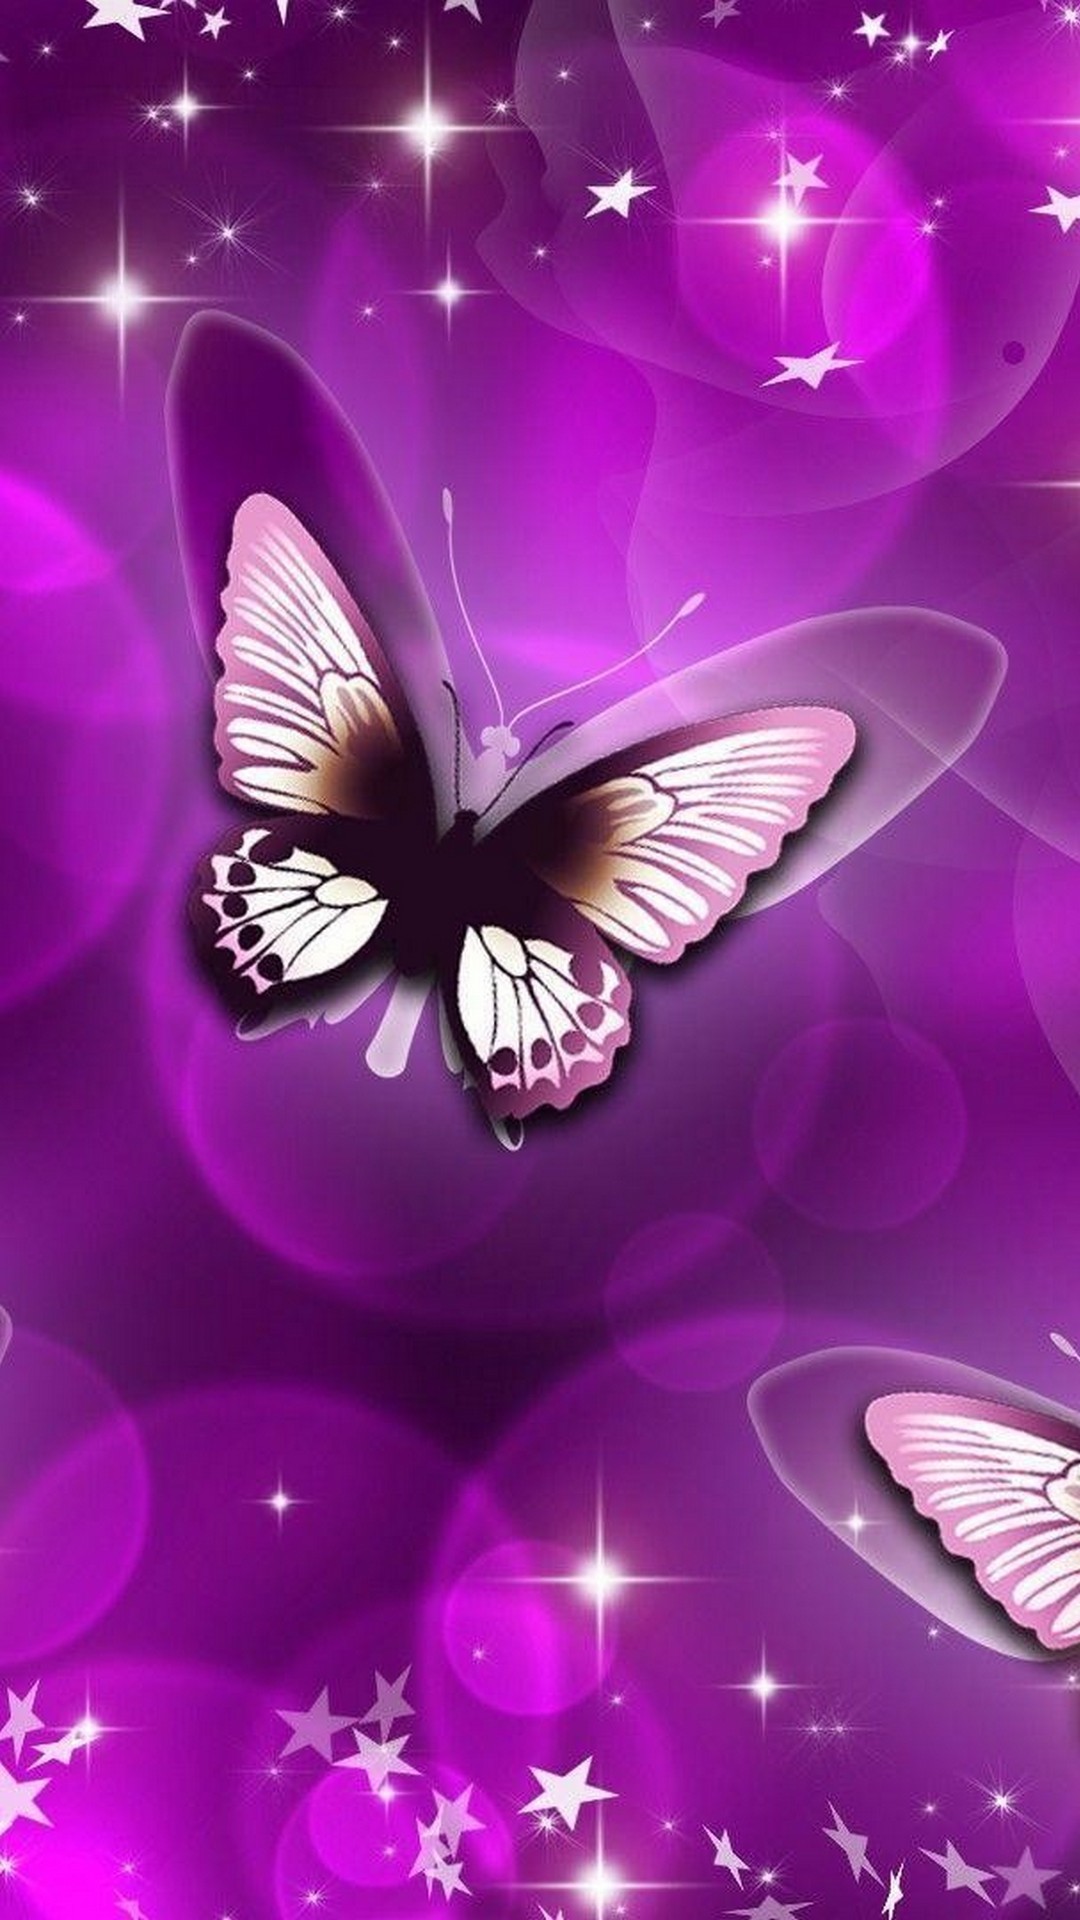 Wallpaper Android Purple Butterfly with HD resolution 1080x1920